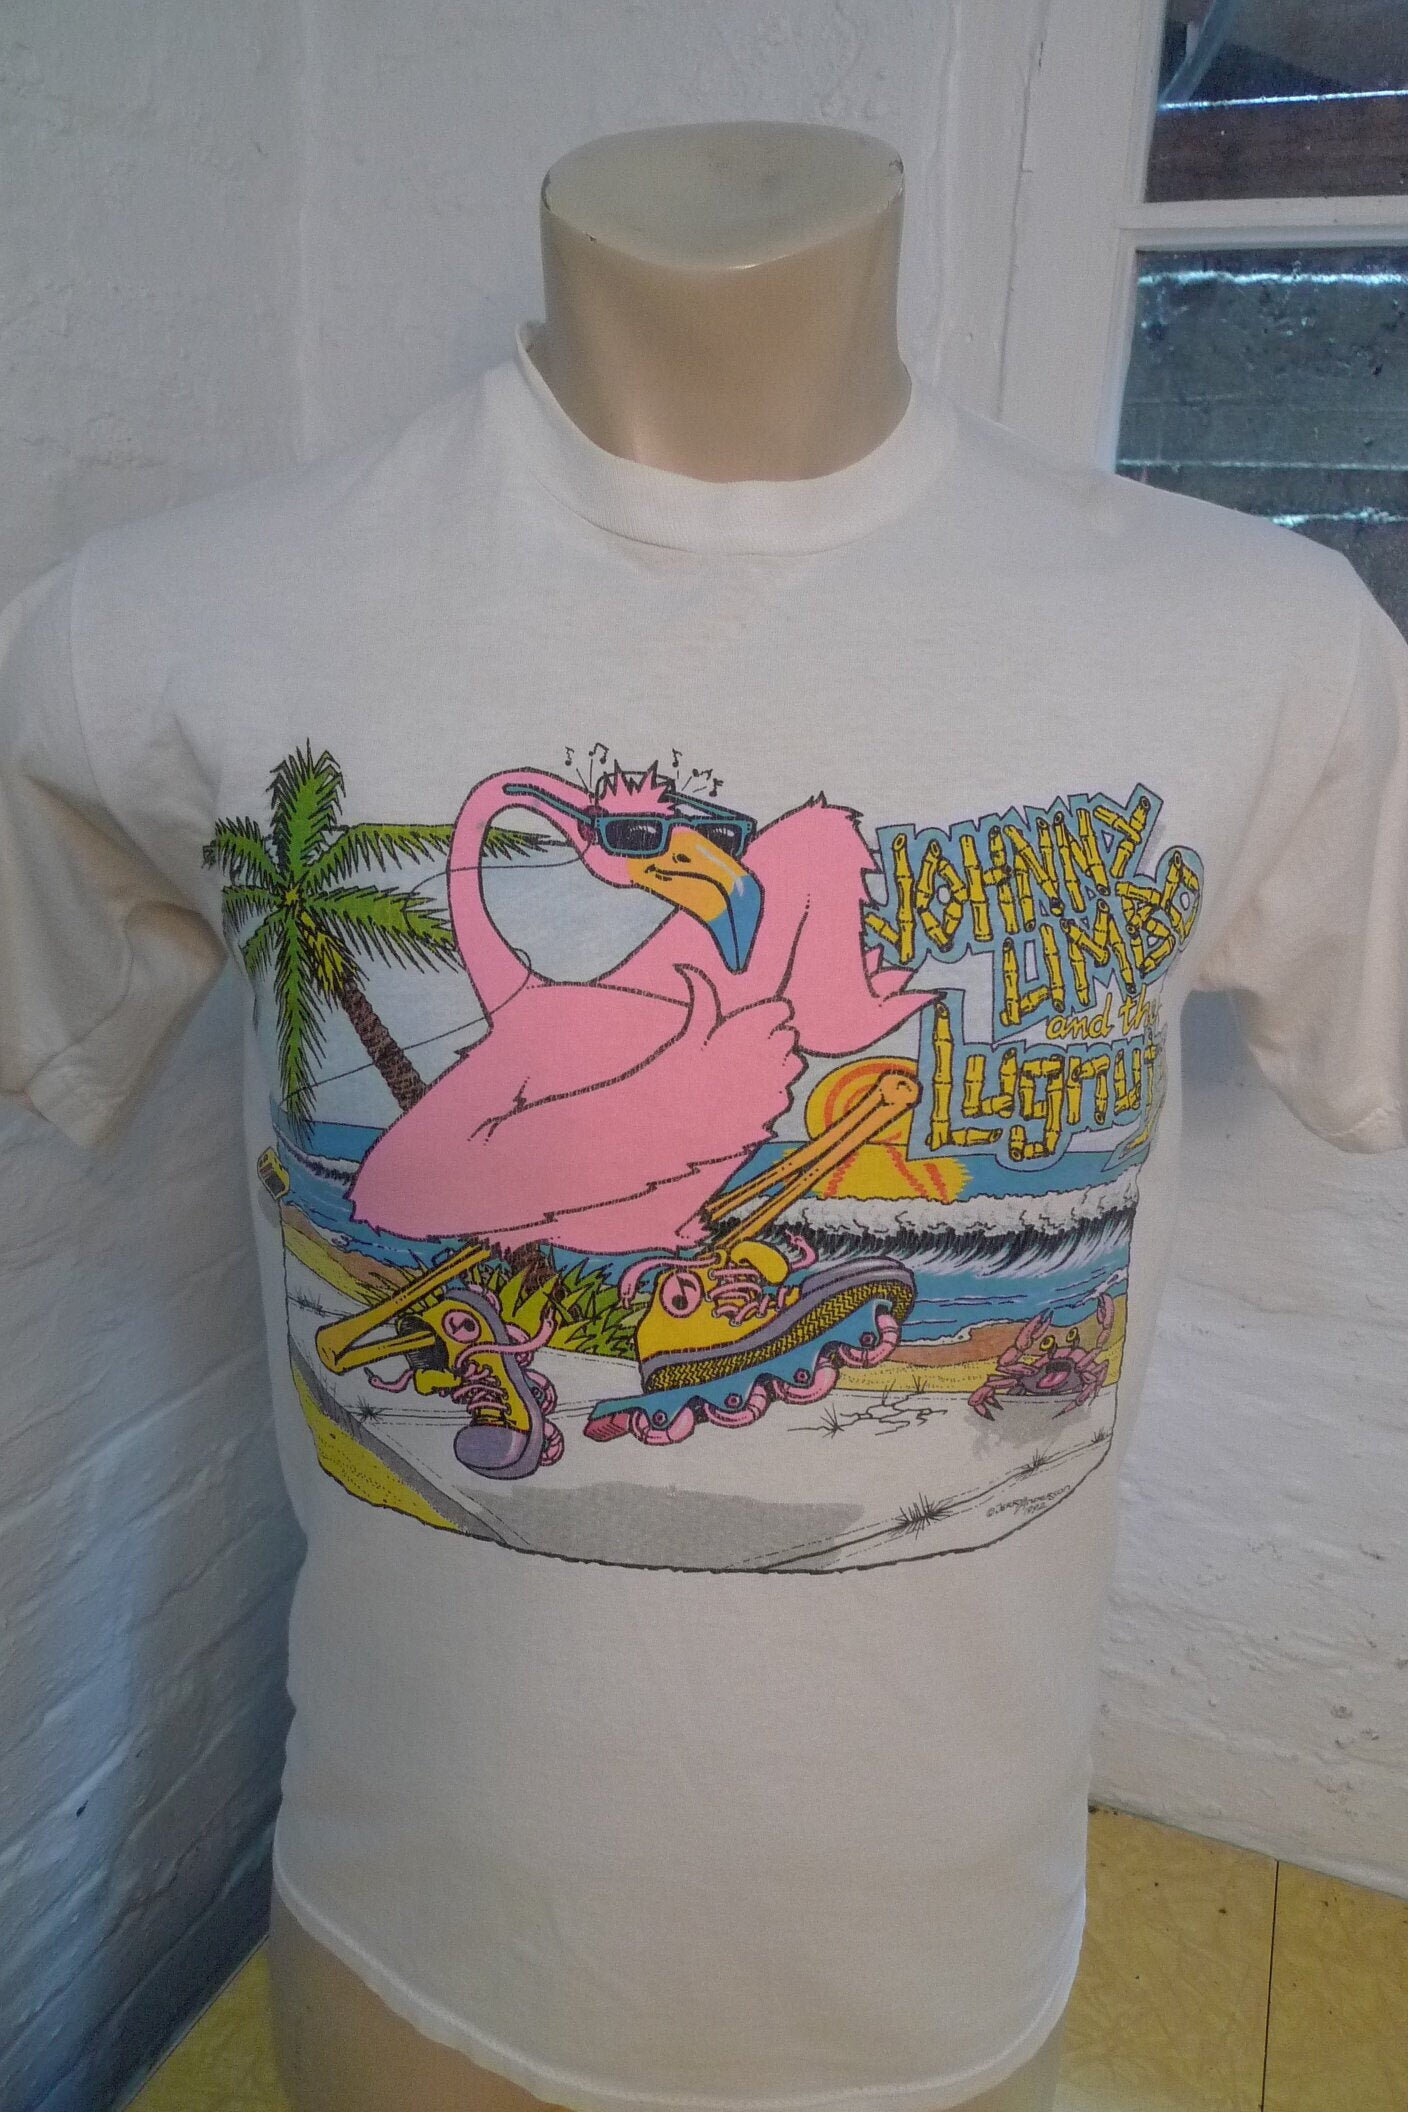 1992 Johnny Limbo and the Lugnuts Concert Shirt Men's Med 42